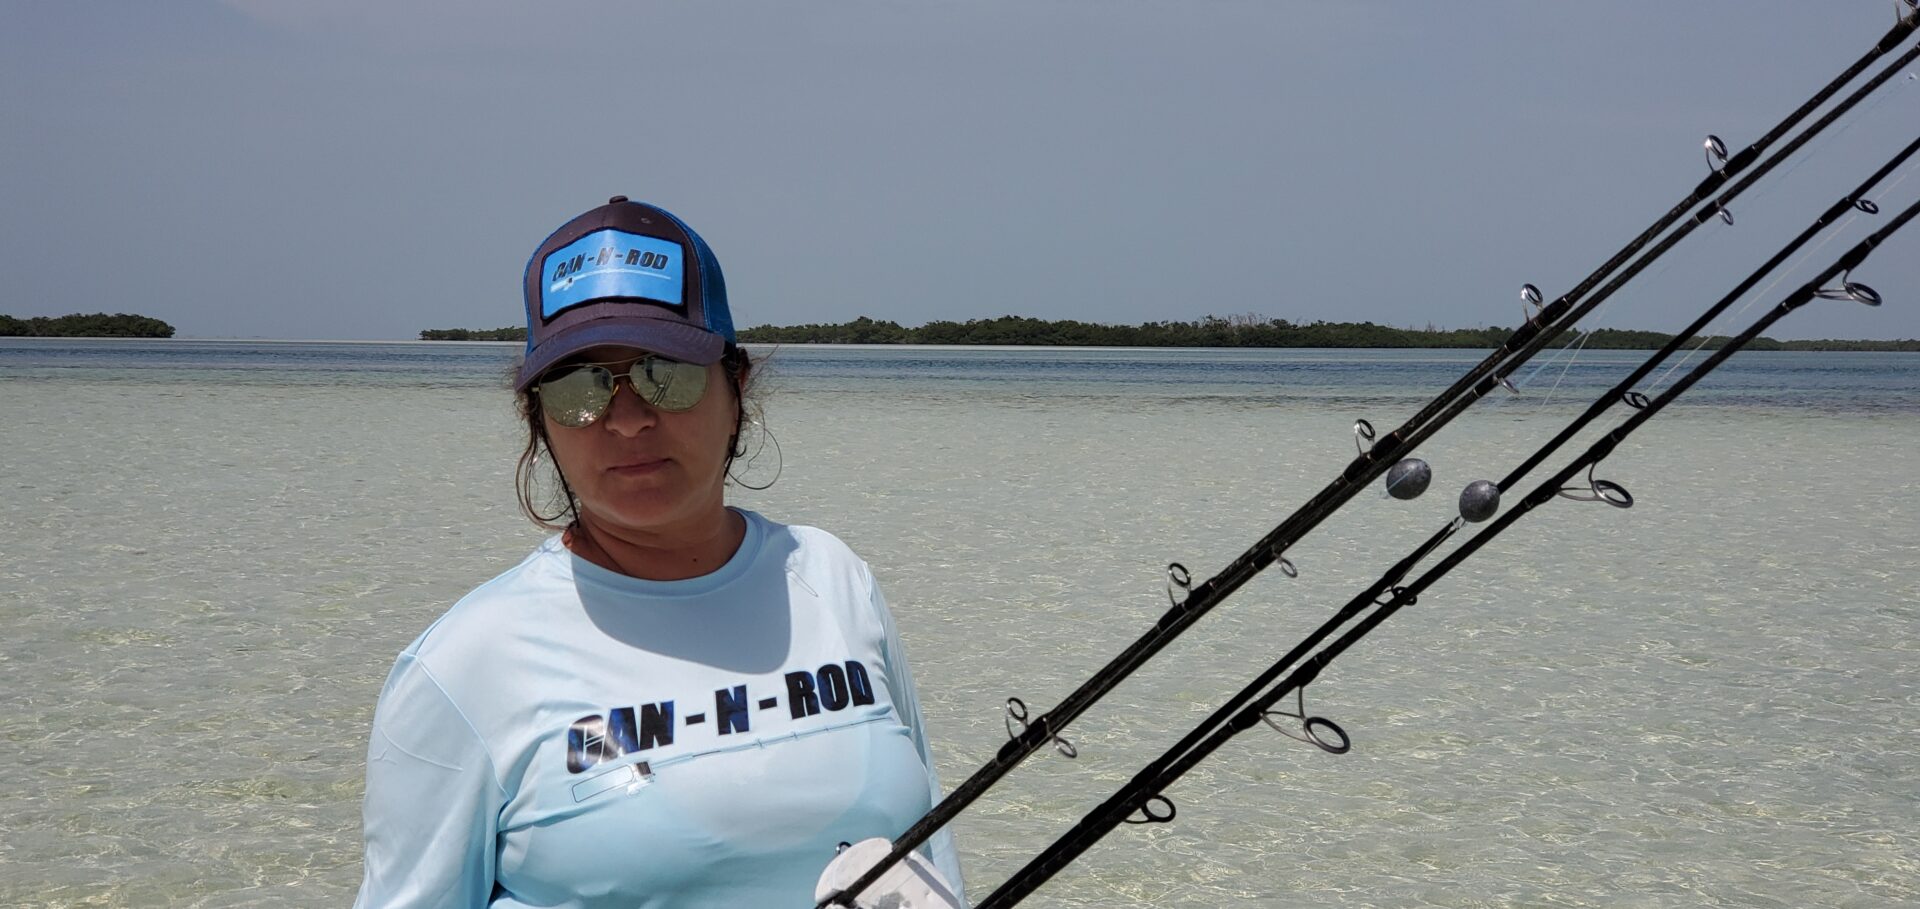 A woman holding two fishing rods on the beach.